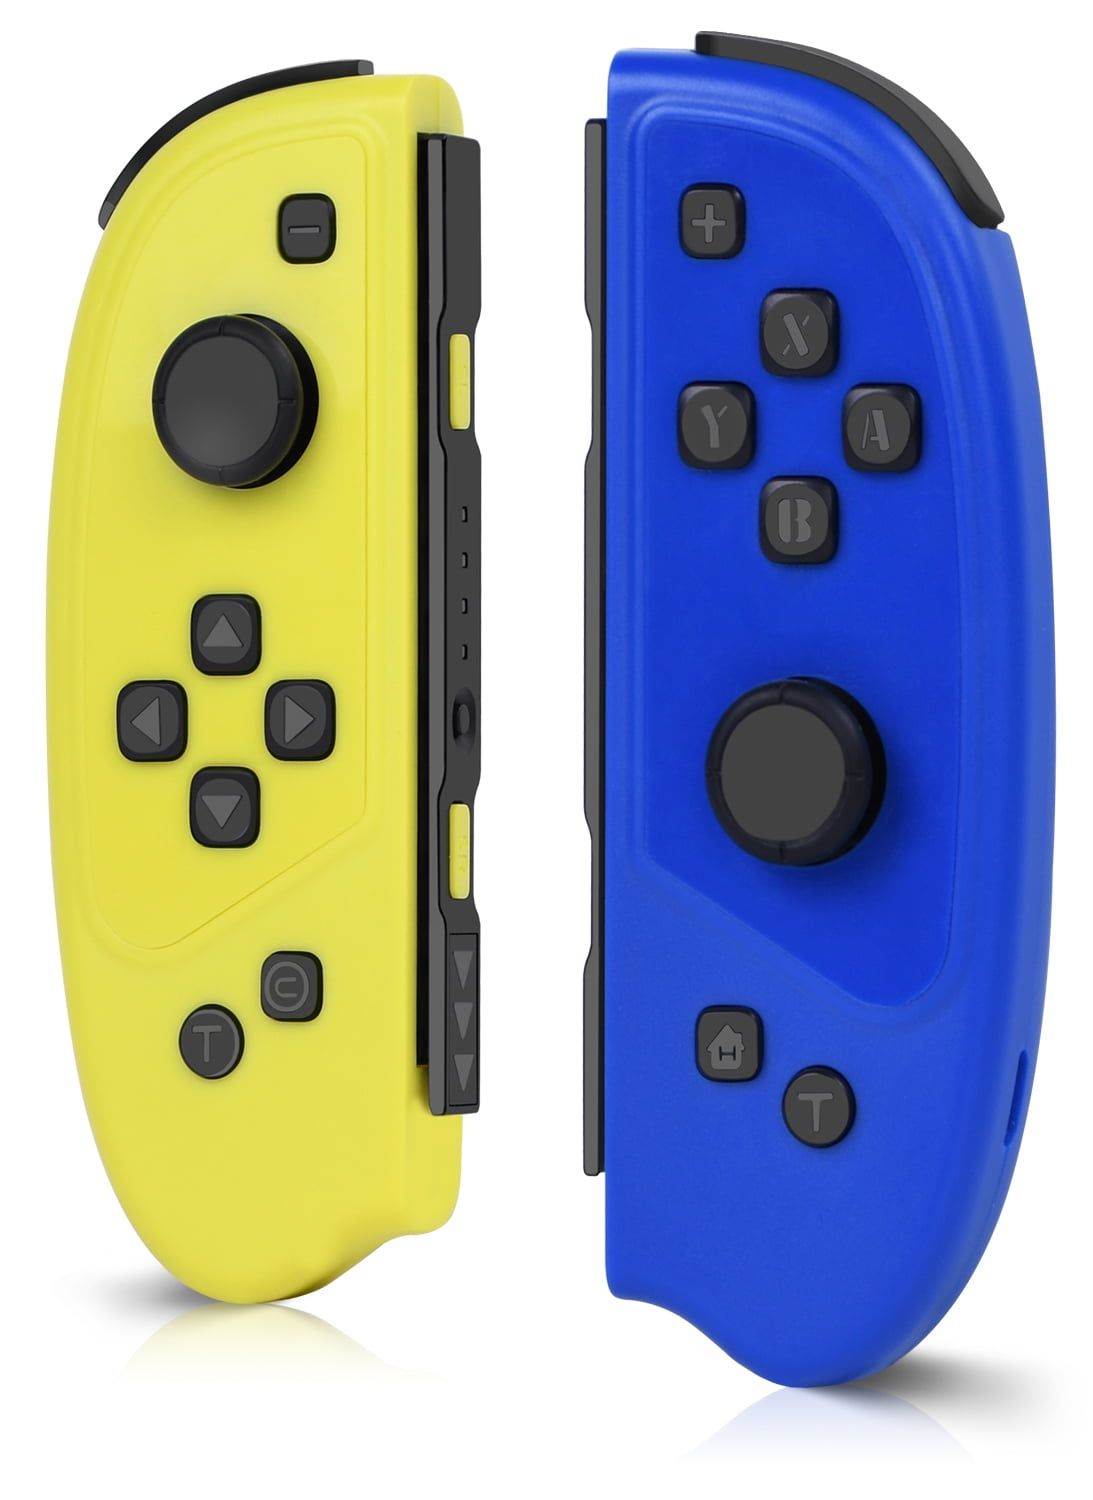 Techken Joy-Con Controller for Nintendo Switch (L/R) - Dual Vibration,  Wake-Up, and Screenshot Support Best Gift for Kids